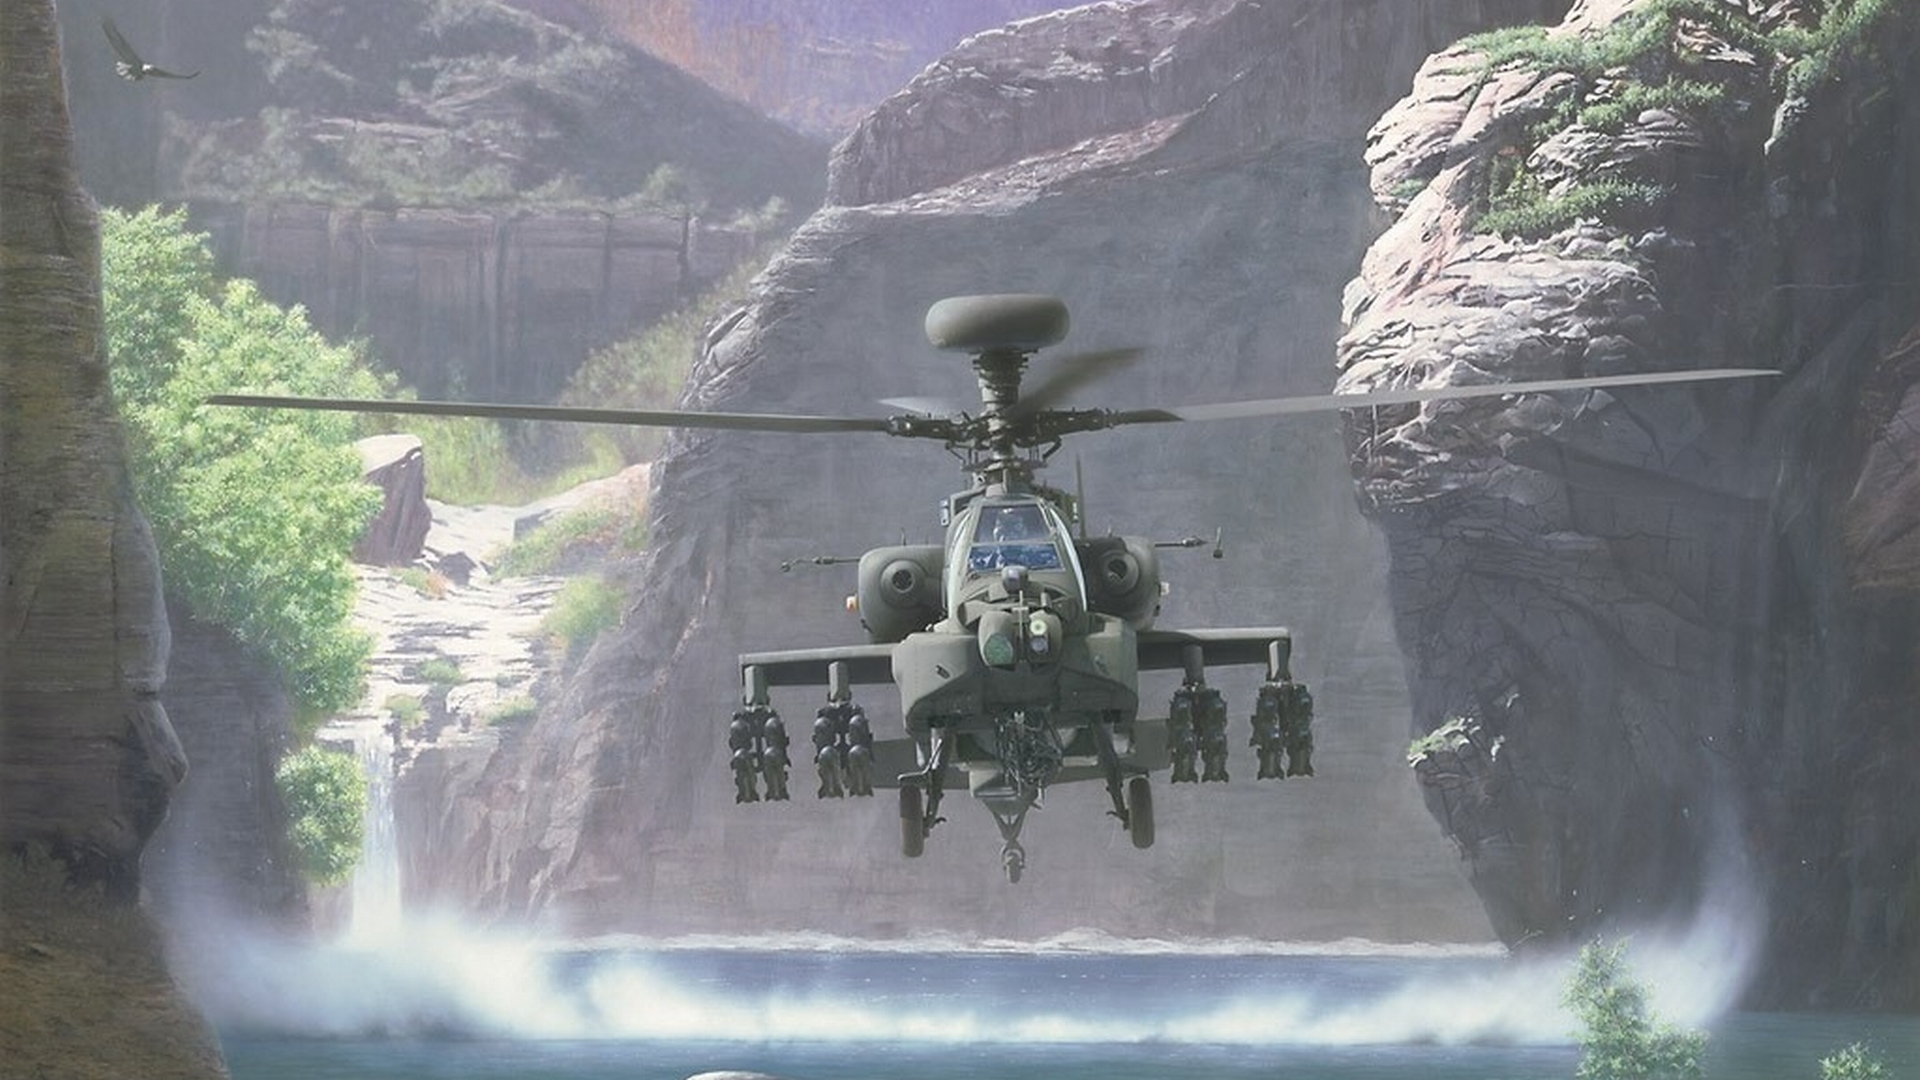 Boeing AH-64 Apache military helicopter flying across a scenic background.